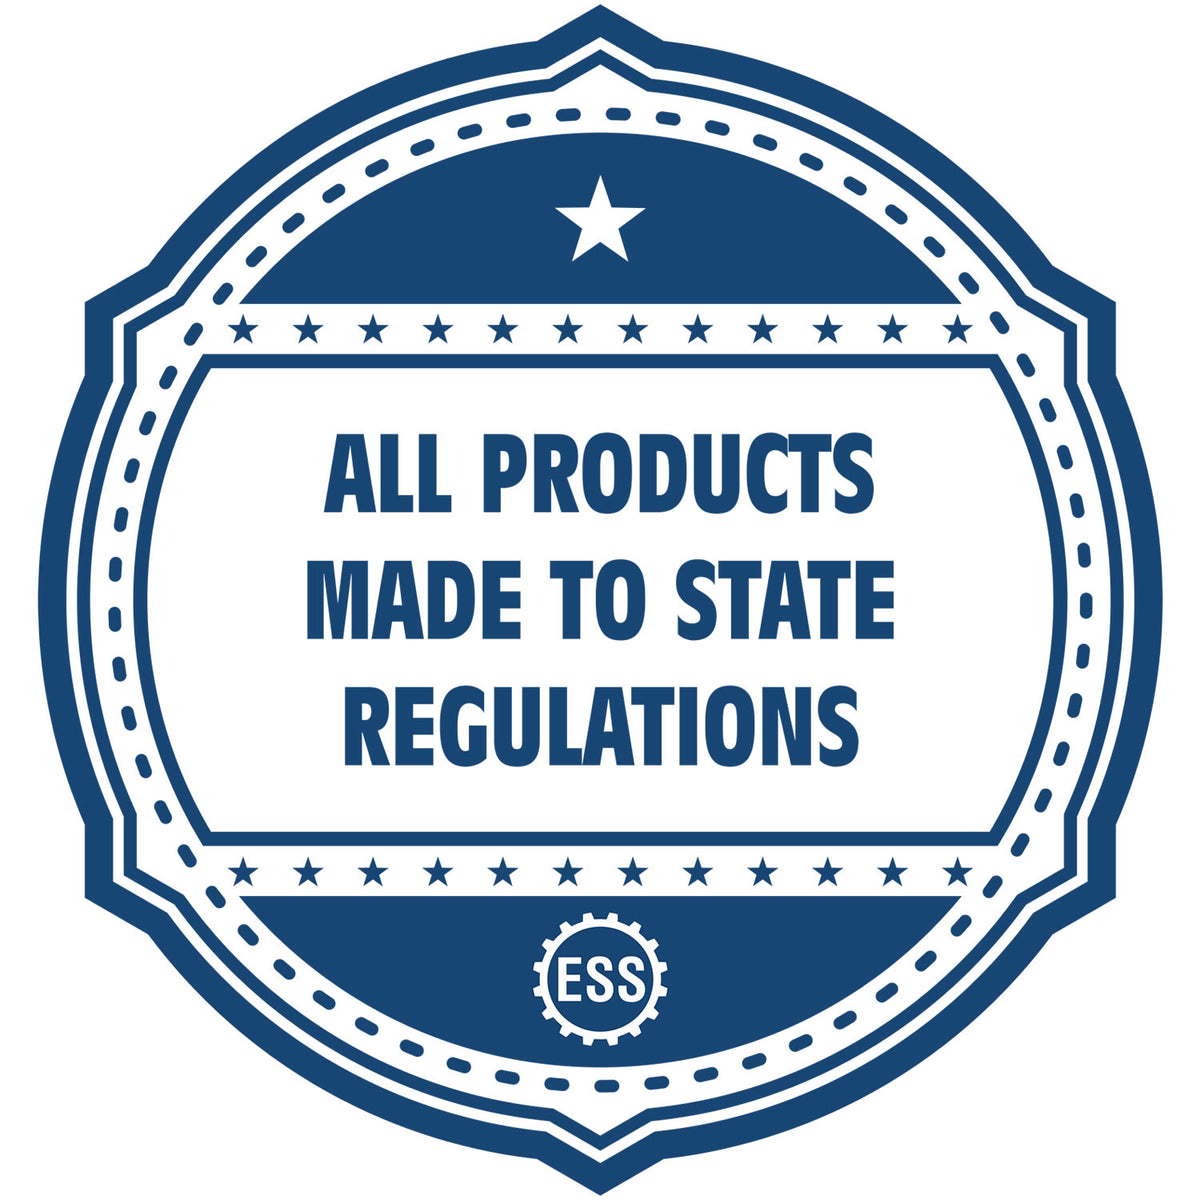 An icon or badge element for the Slim Pre-Inked Rectangular Notary Stamp for Wyoming showing that this product is made in compliance with state regulations.